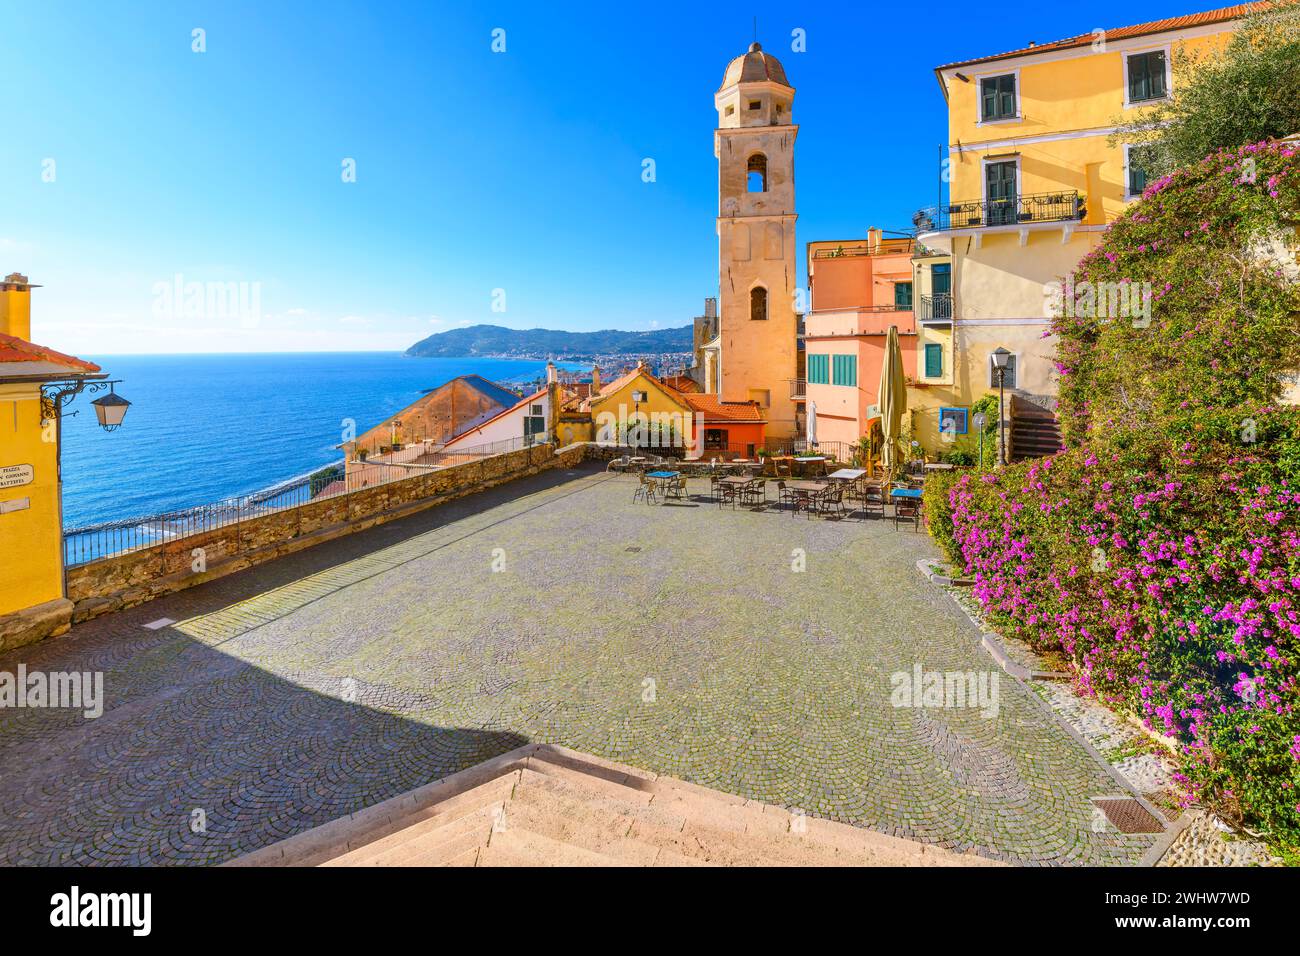 View from the steps of the Church of San Giovanni Battista of the Oratorio di Santa Caterina Tower, old town and Mediterranean from the Ligurian town Stock Photo